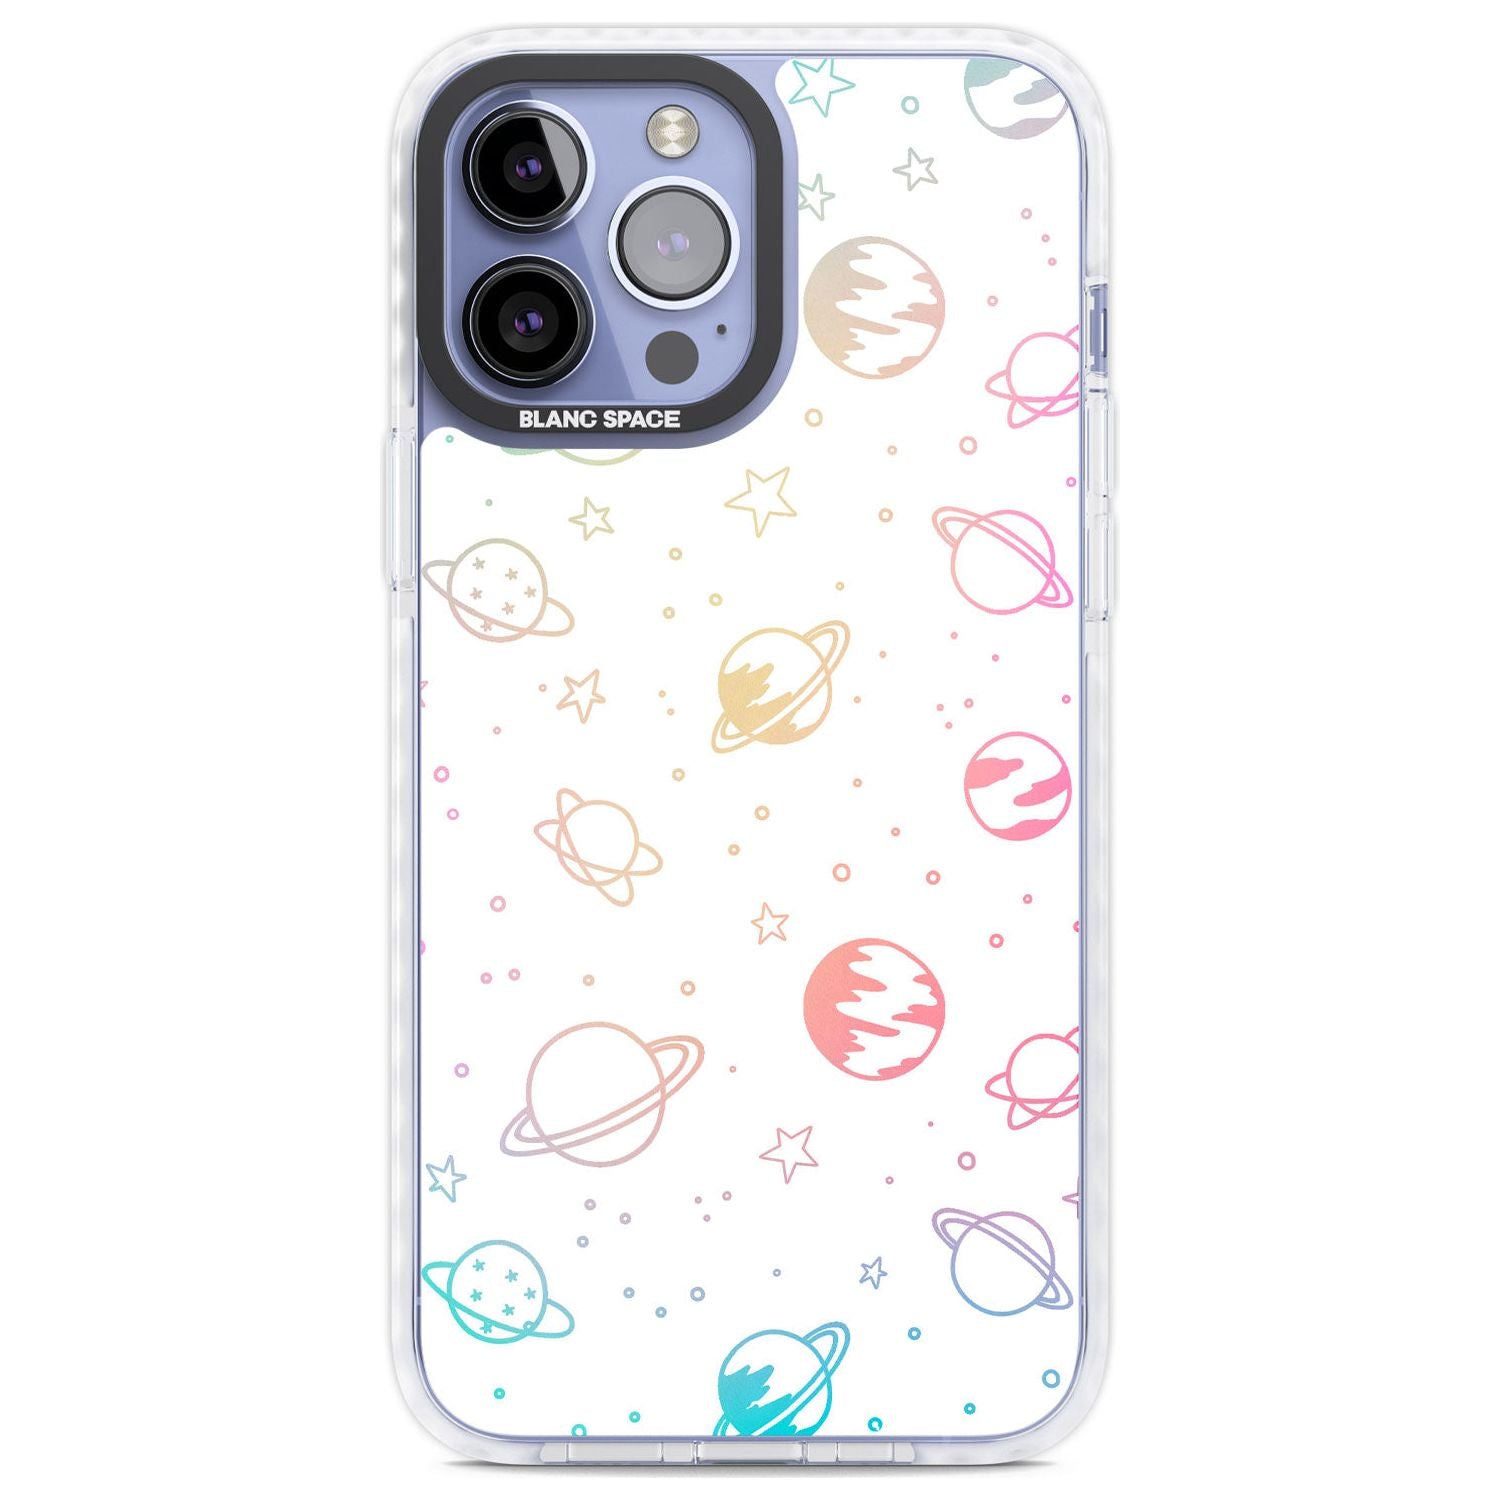 Cosmic Outer Space Design Pastels on White Phone Case iPhone 13 Pro Max / Impact Case,iPhone 14 Pro Max / Impact Case Blanc Space